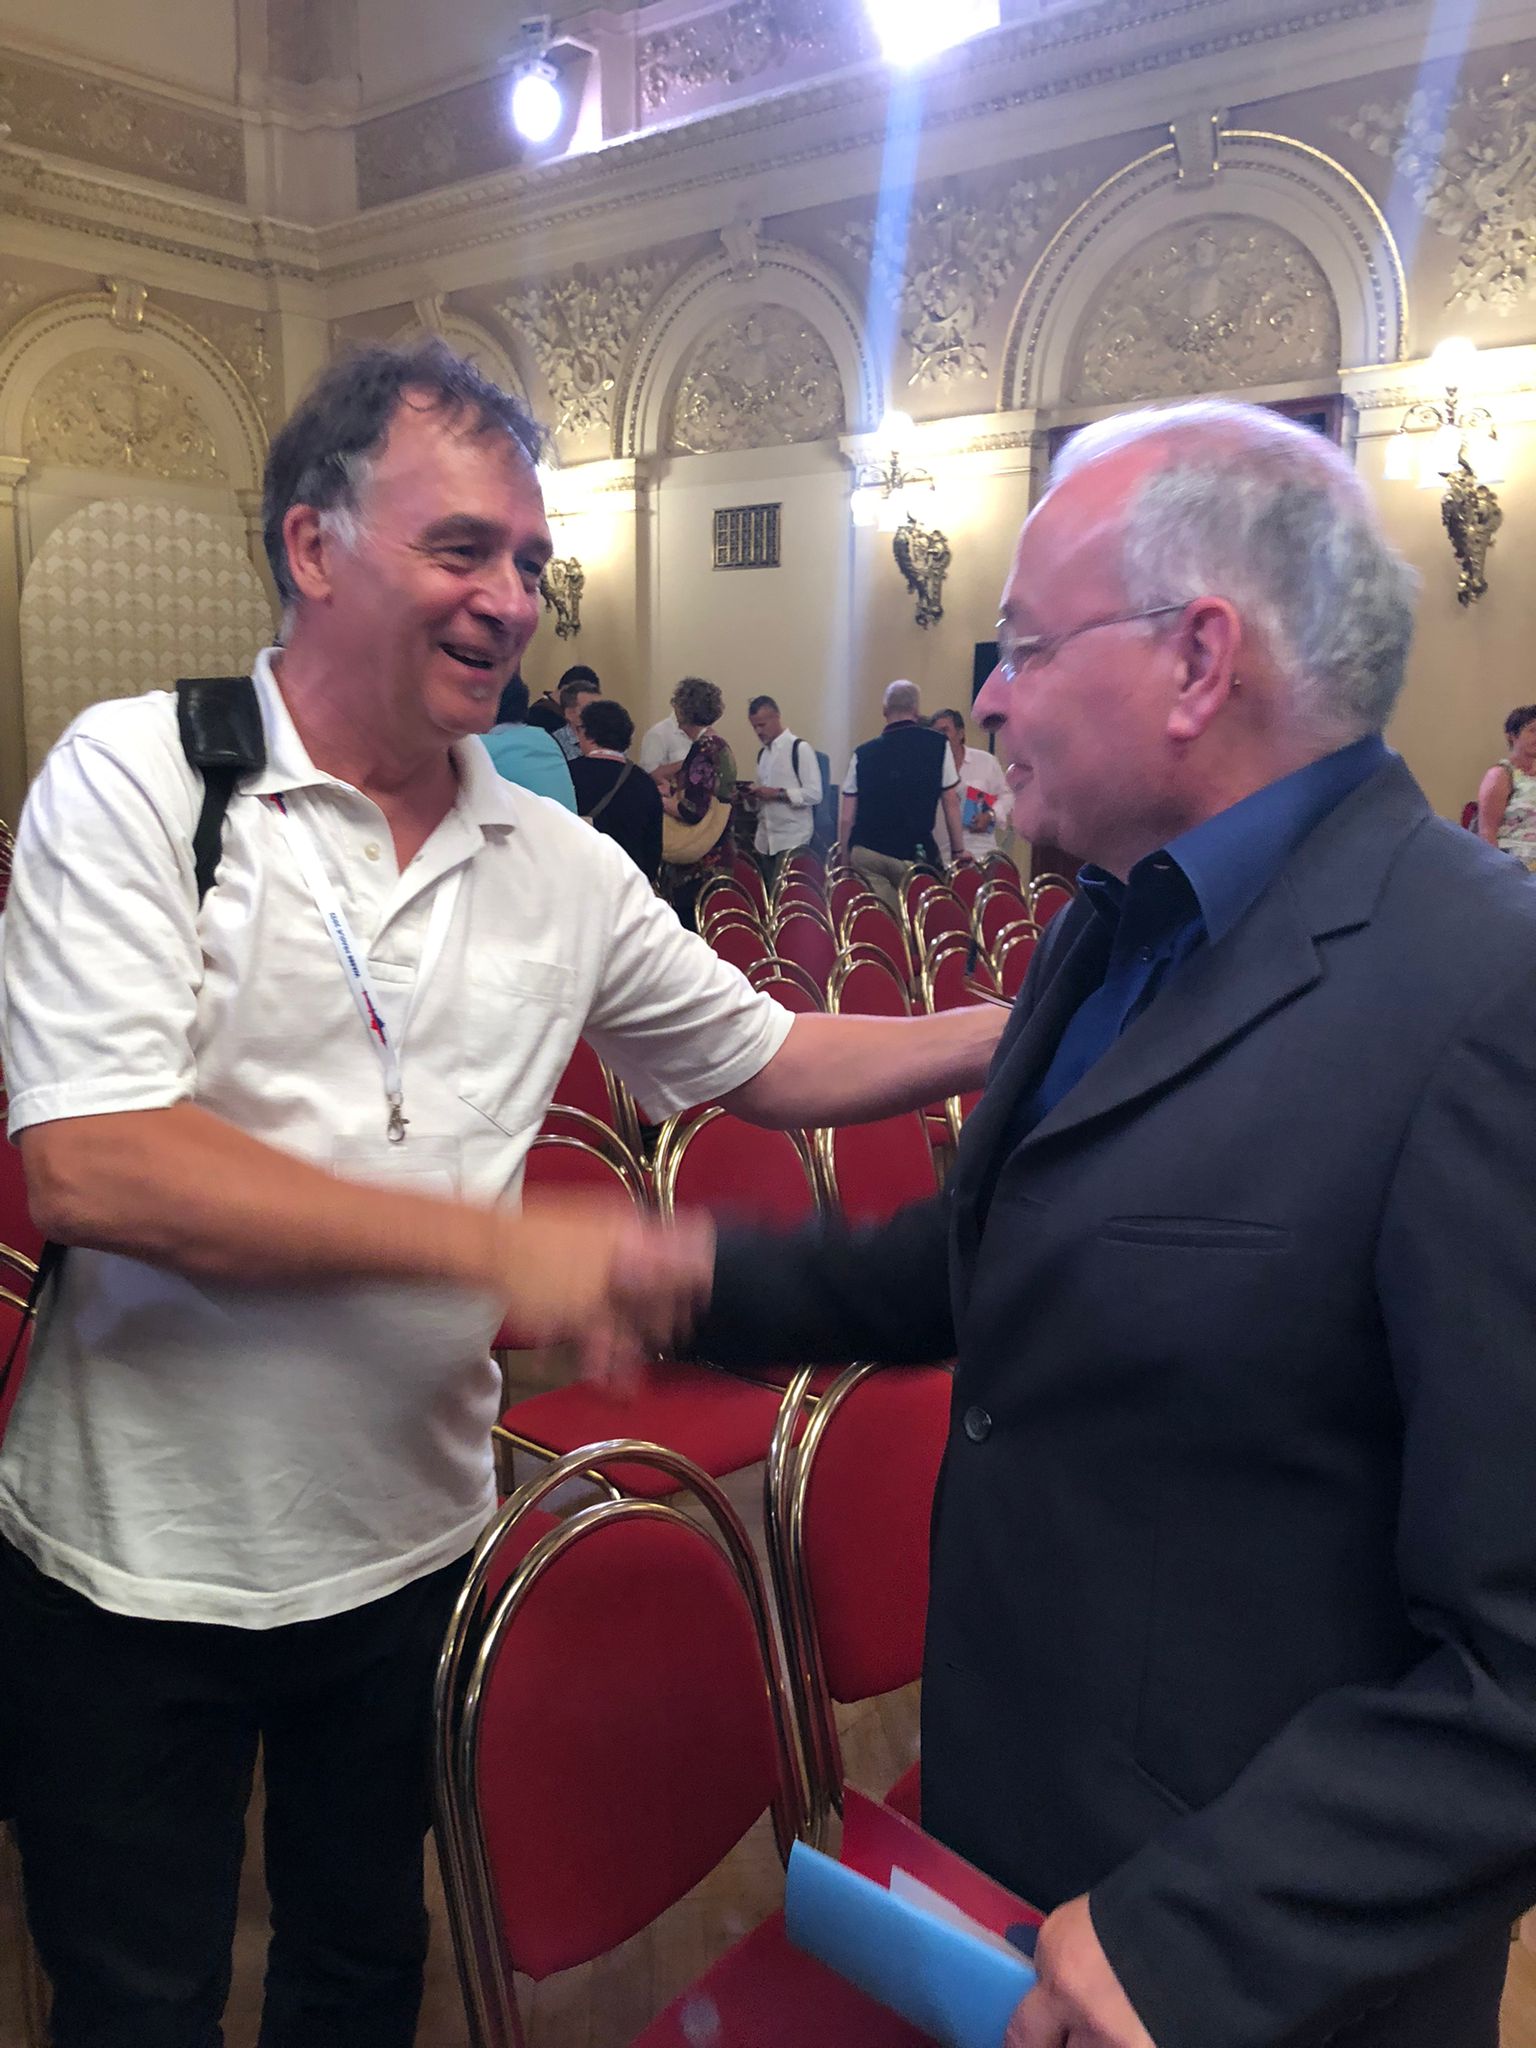 Franco Cesarini & Bert Langerer at the WASBE Conference in Prague (Czech Republic), 19th-23rd July, 2022